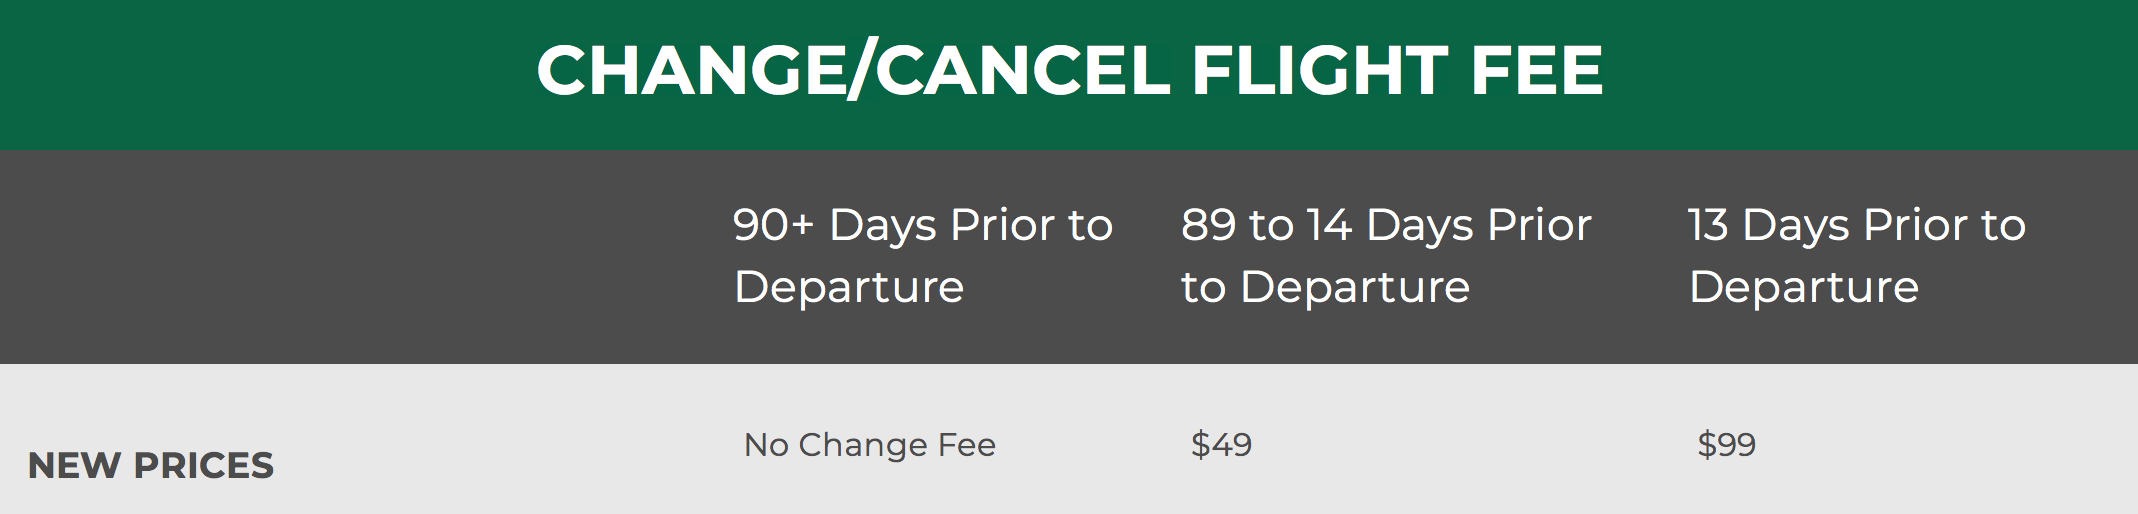 frontier-lowers-and-improves-change-and-cancellation-fee-policies